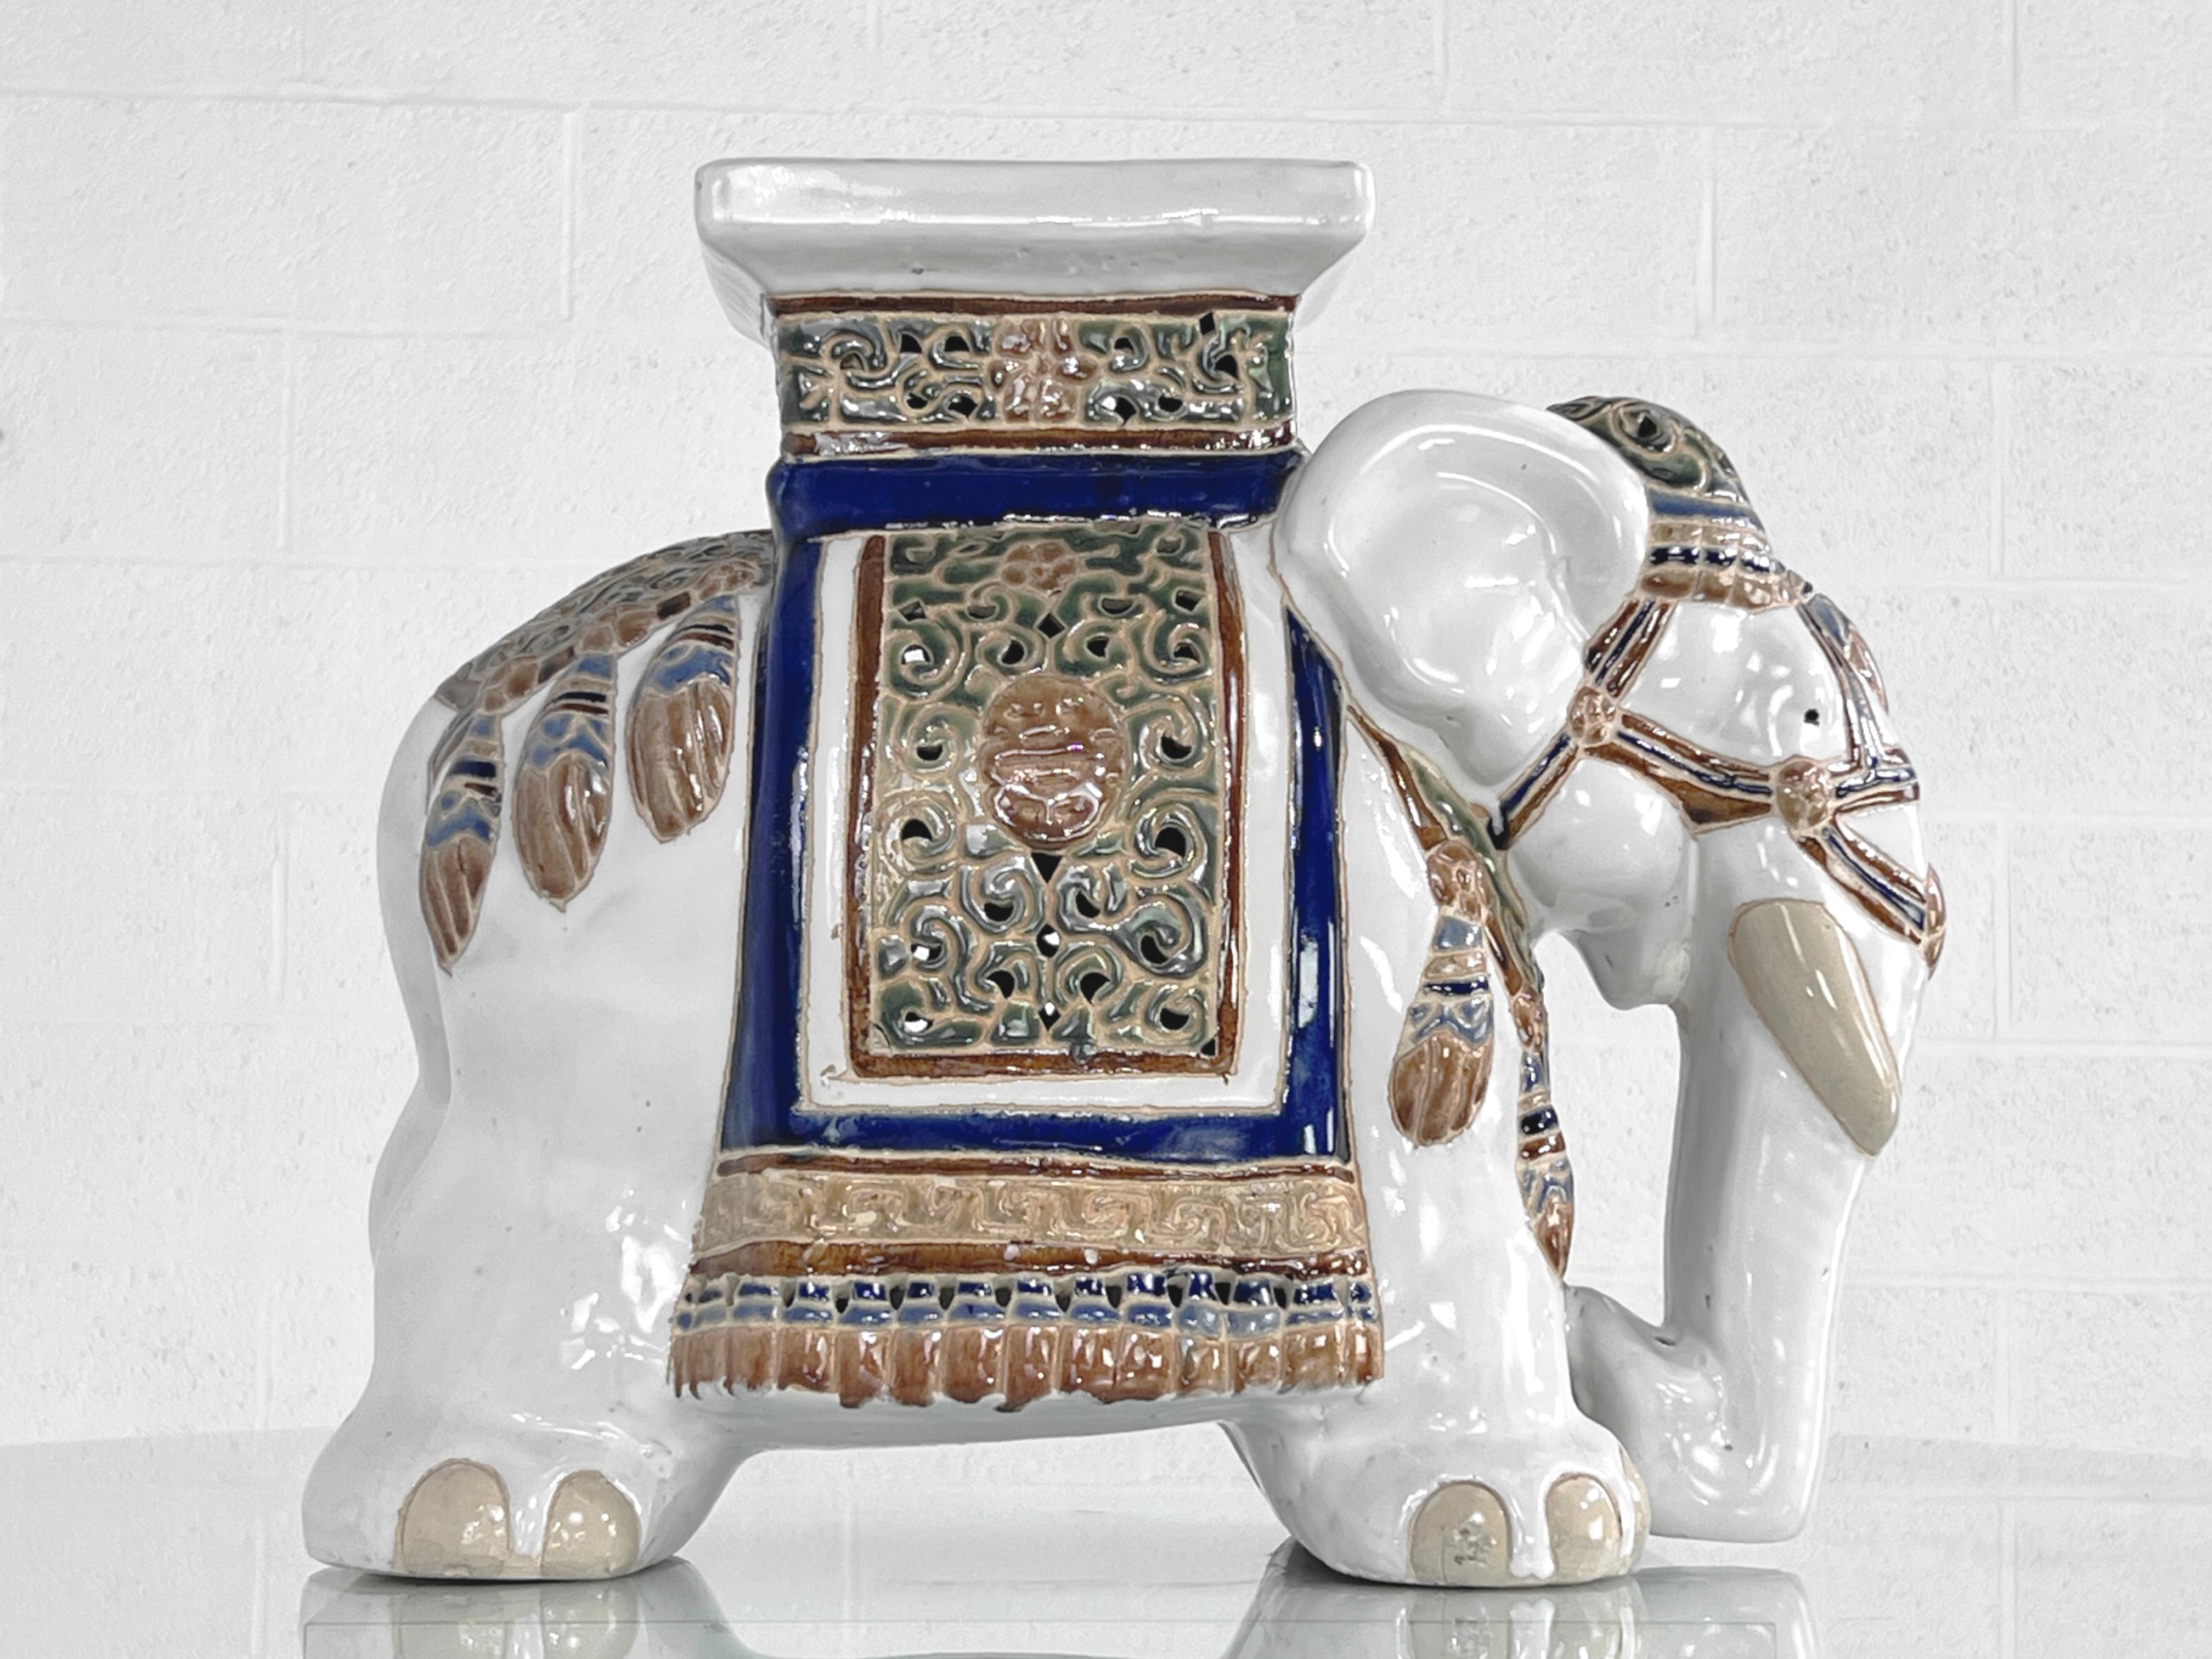 1960s - 1970s Vintage Ceramic Side Table Or Stool Elephant shaped in white and blue colors